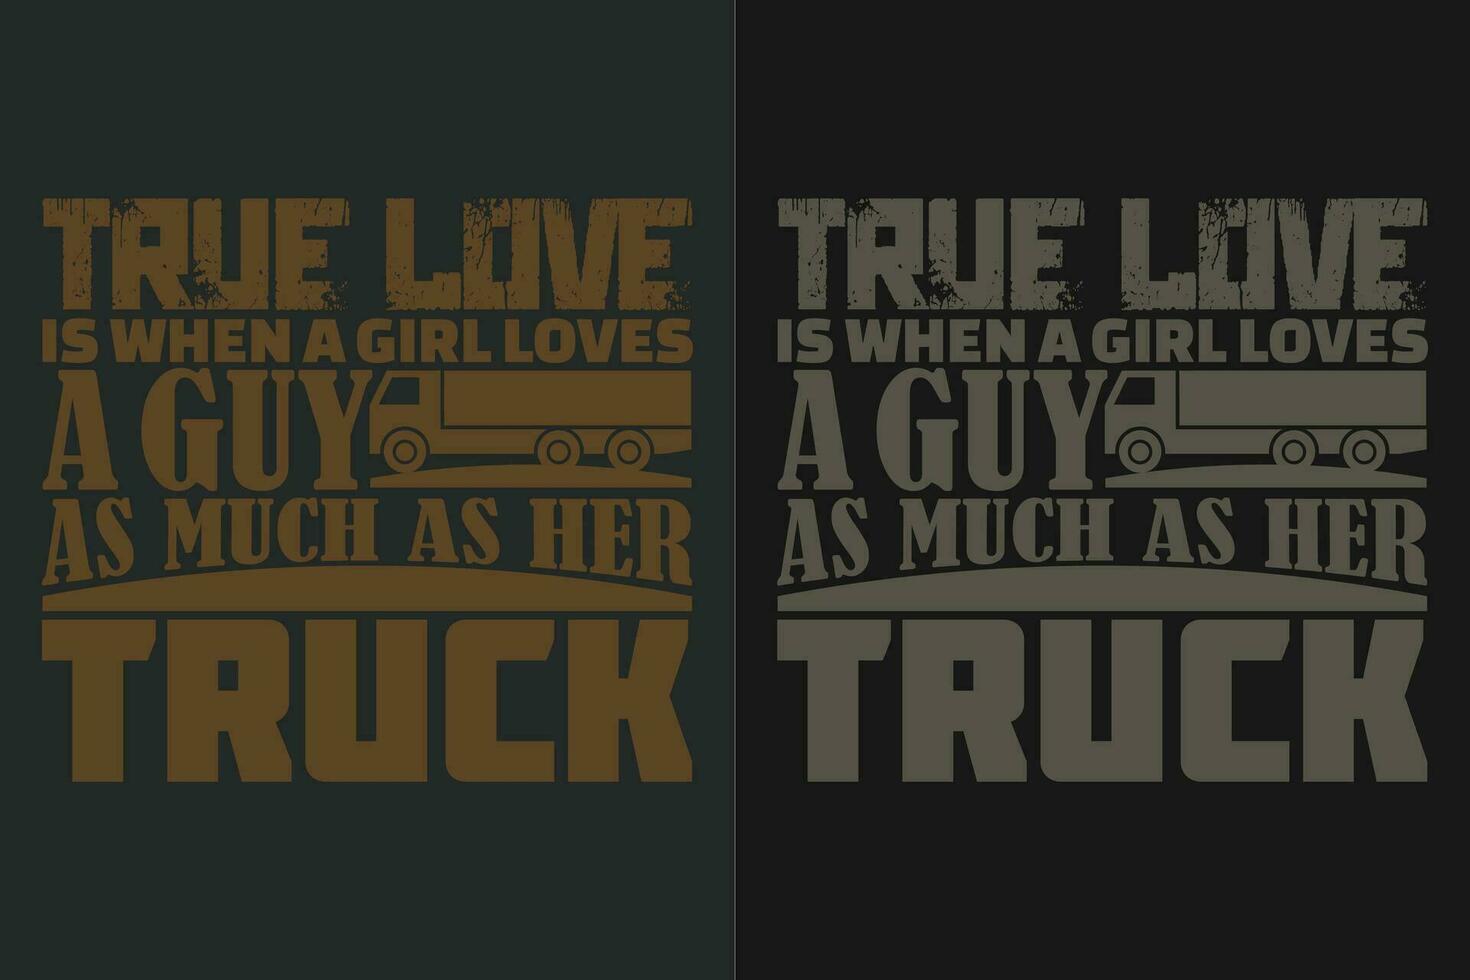 True Love Is When A Girl Loves A Guy As Much As Her Truck, Truck Shirt, Truck Driver Shirt, Funny Truck Shirt, Truck Driving Shirt, Truck Lover Shirt, Trucker Dad Shirt, Driver Birthday Gift vector